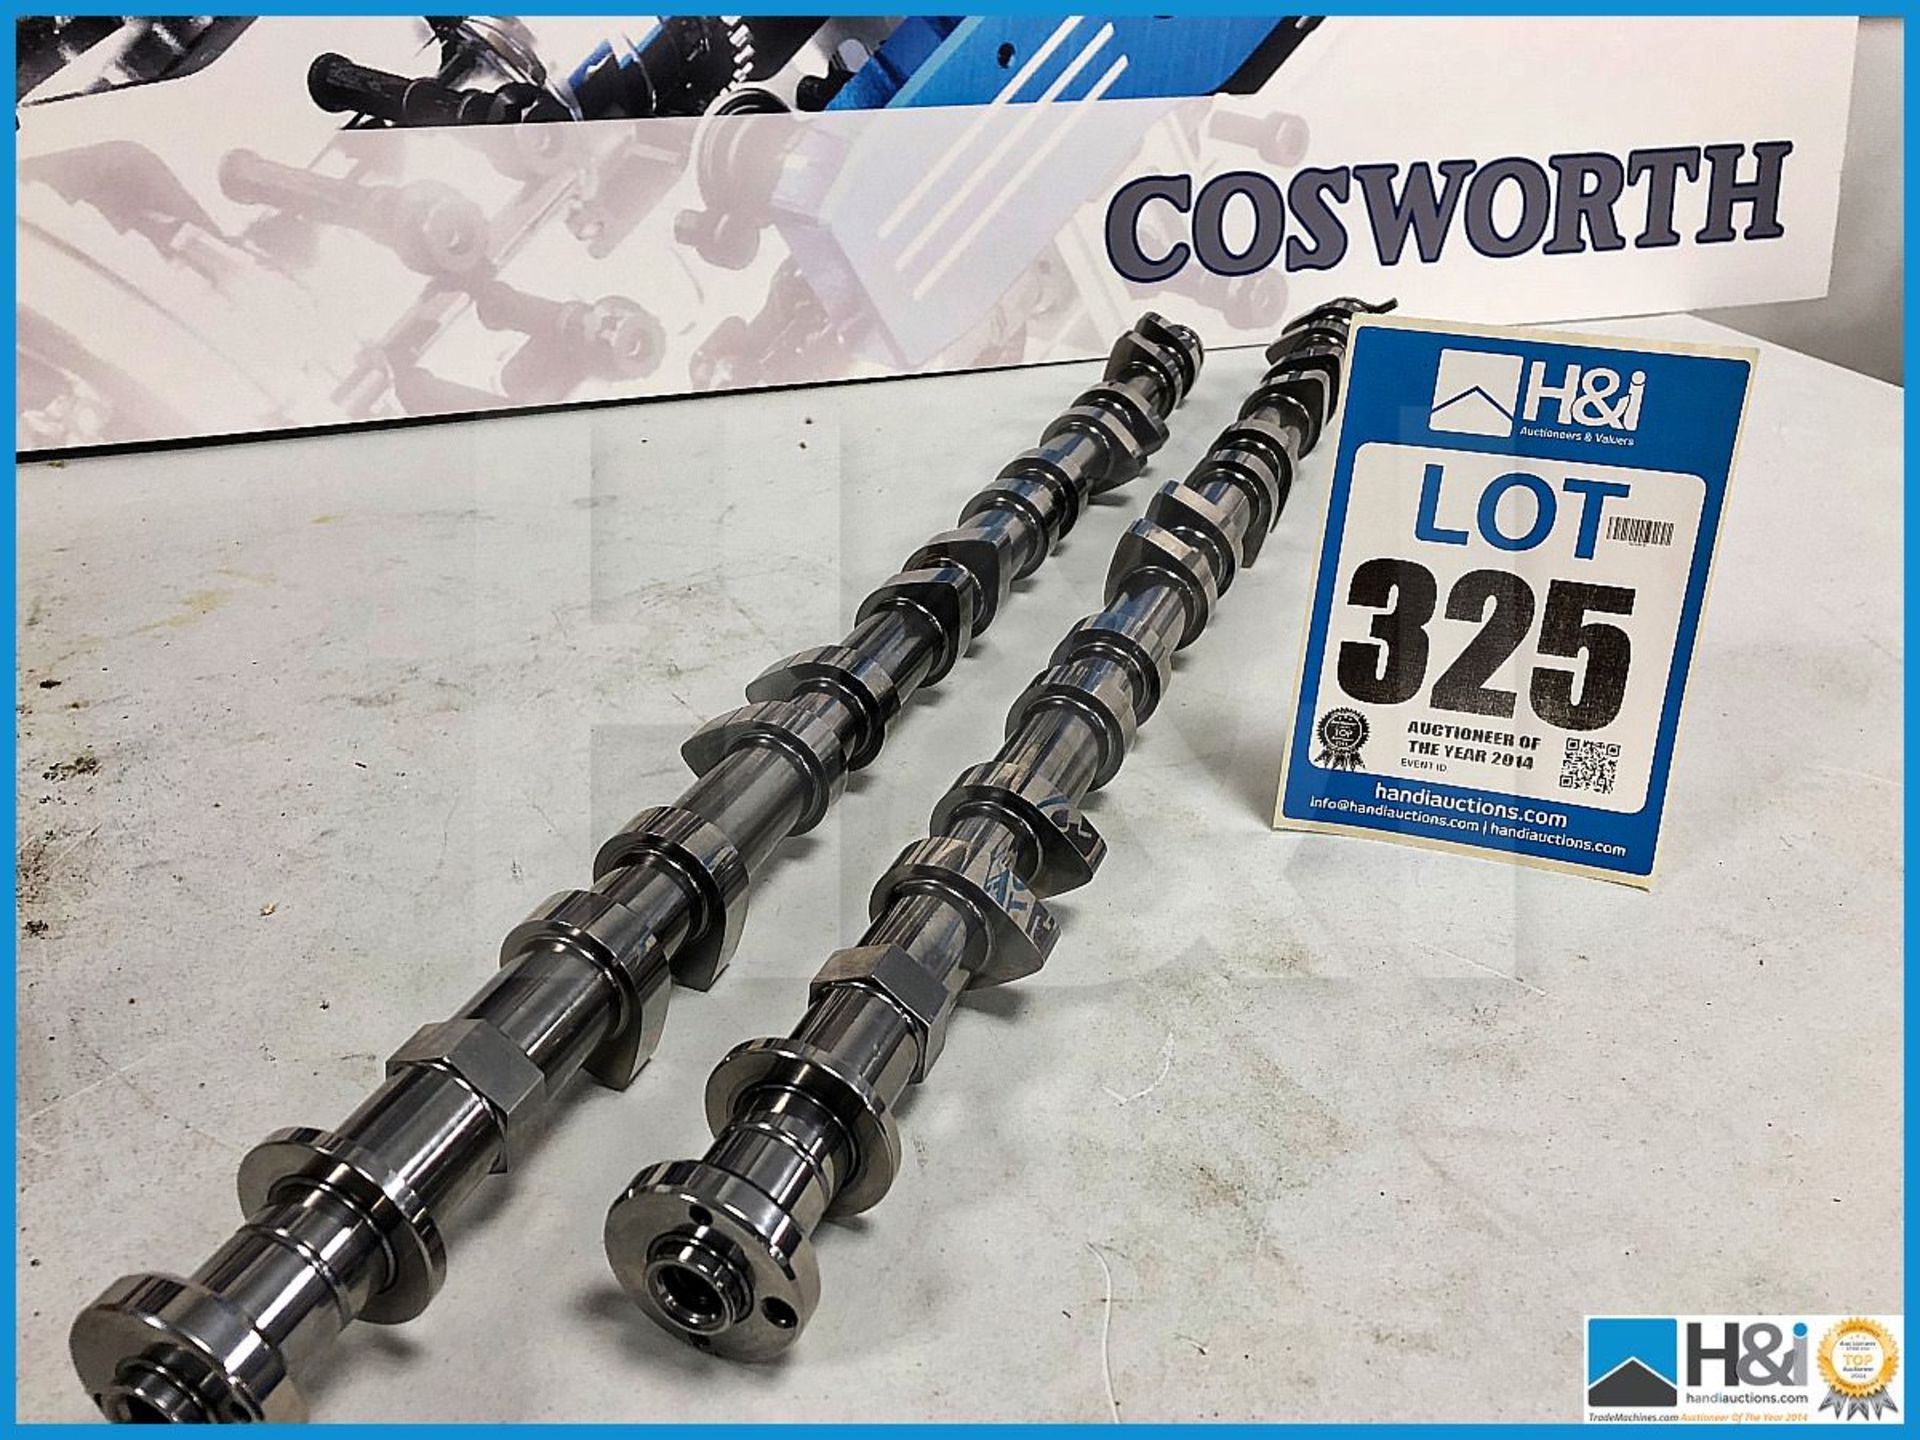 Cosworth JK RH and LH inlet camshafts AM18. Code: 20007562 and 20007563. Lot 259 & 260. RRP GBP 4,20